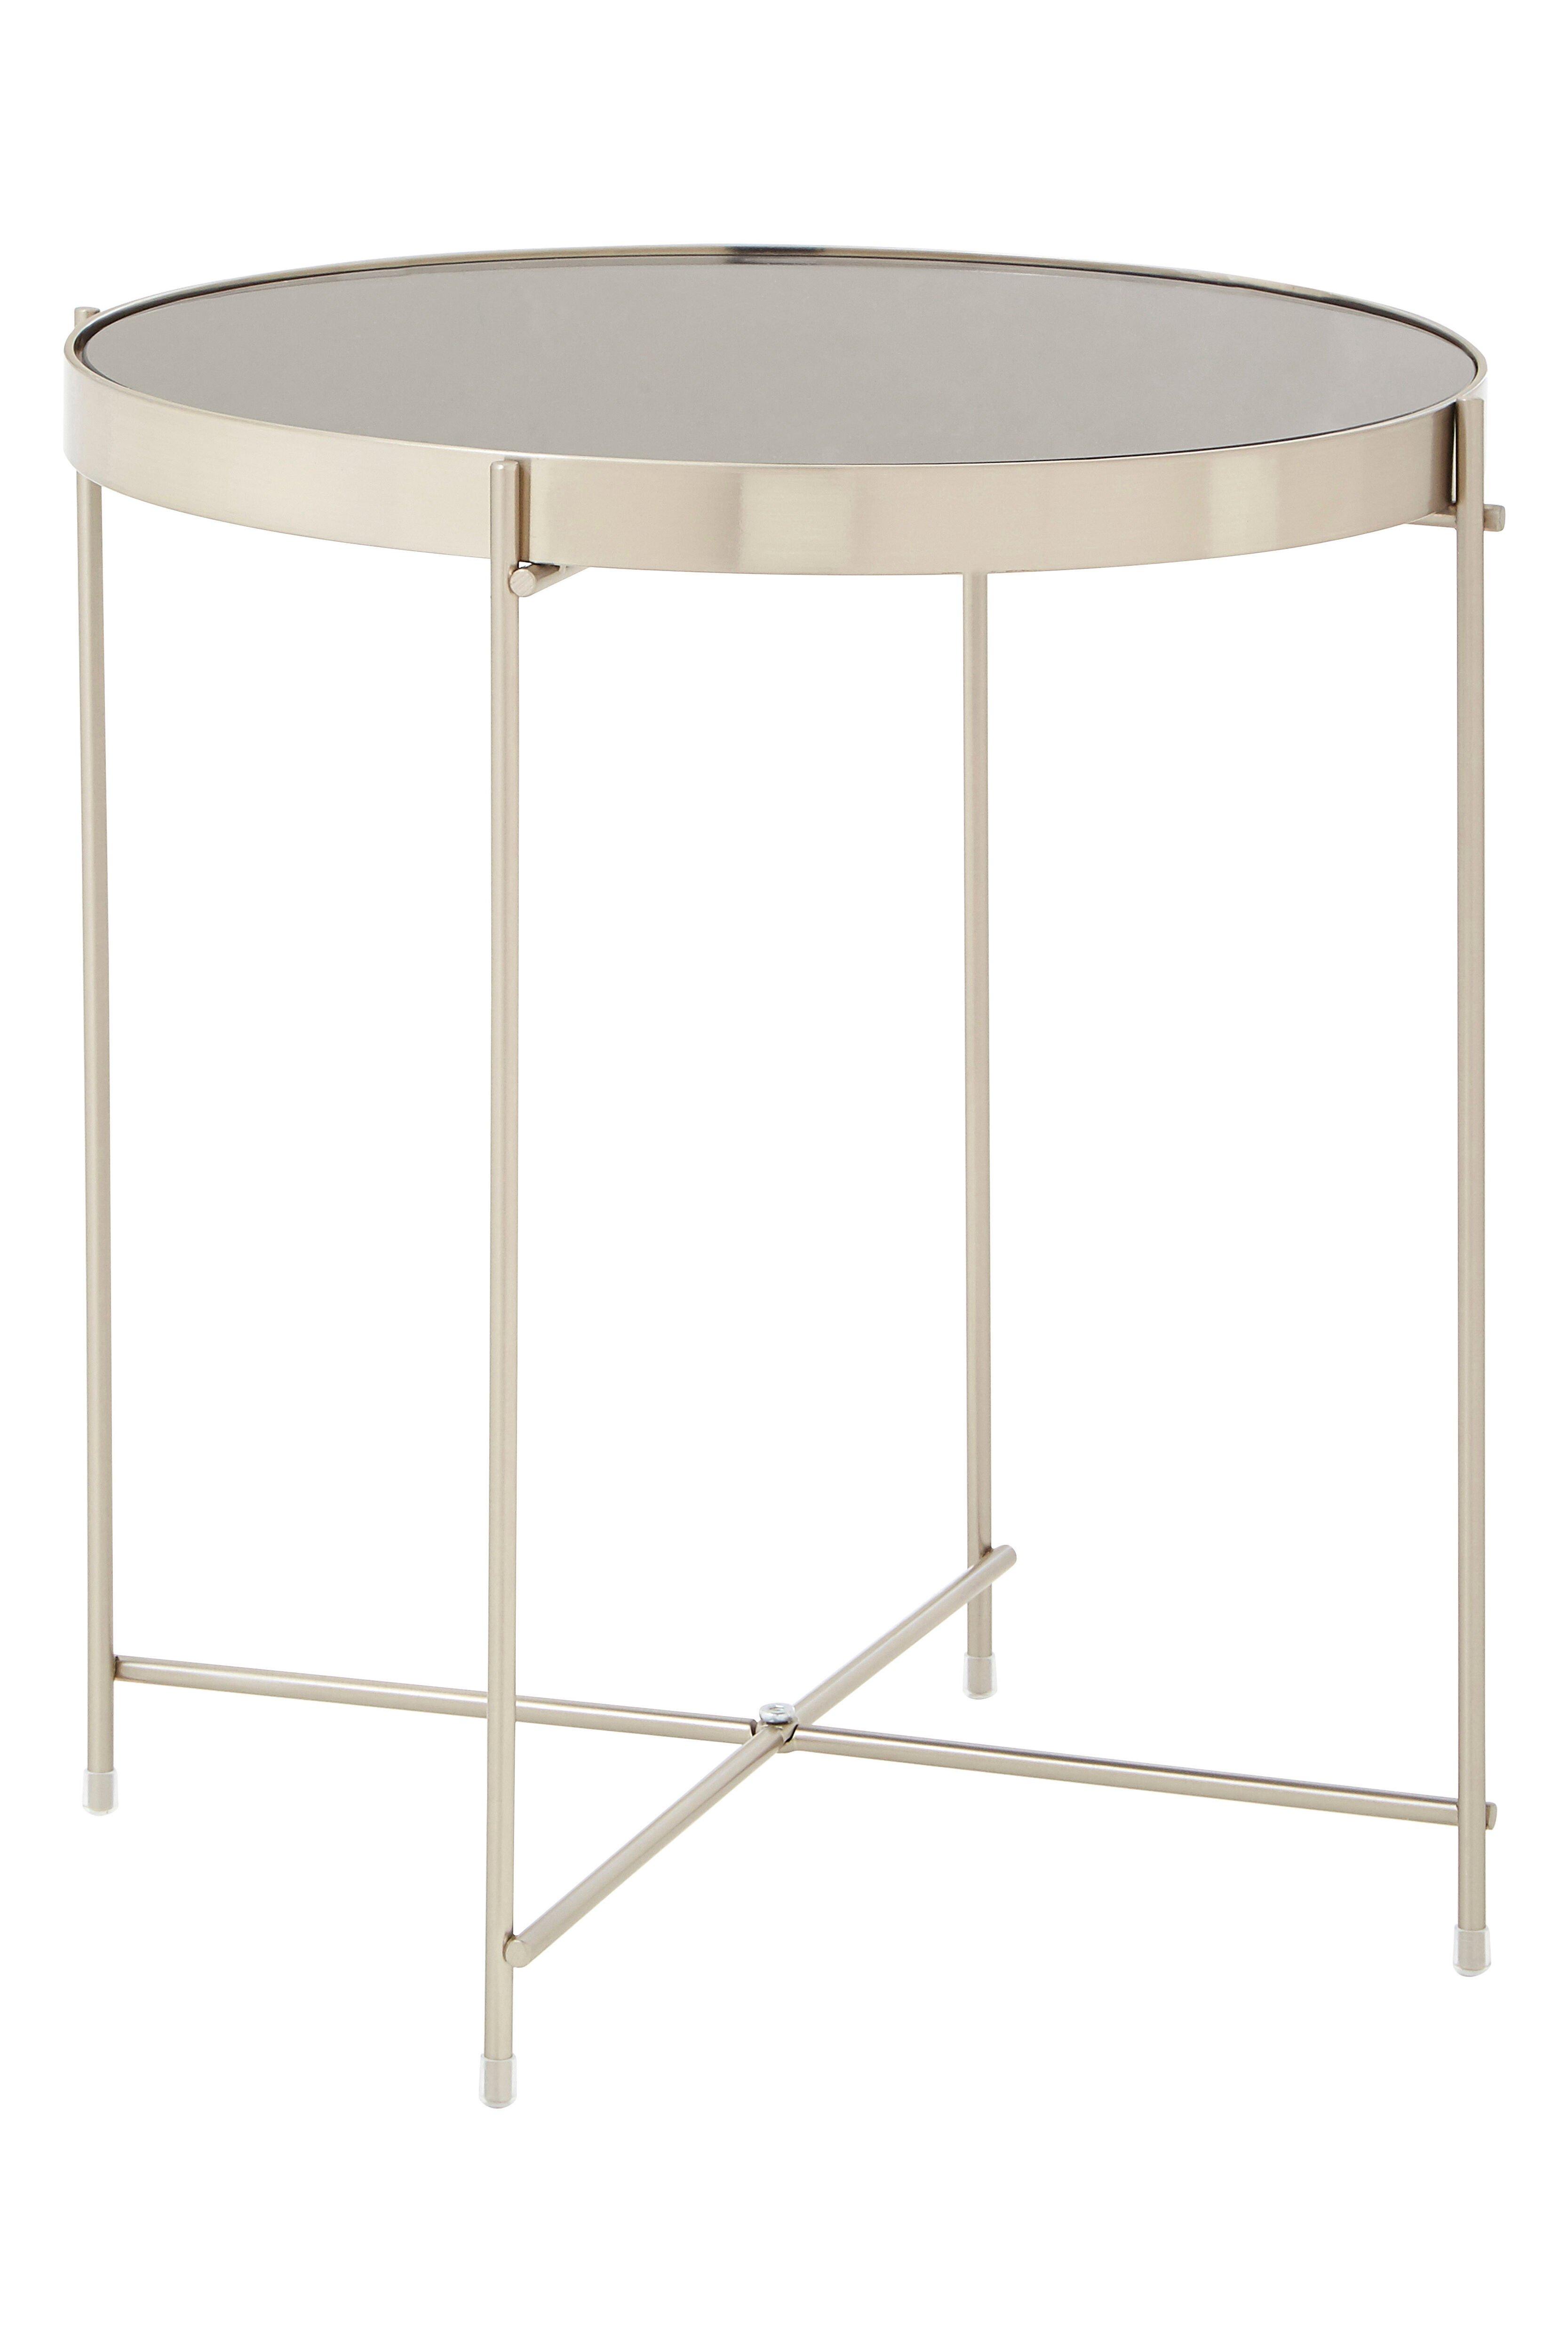 Allure Mirror Low Side Table